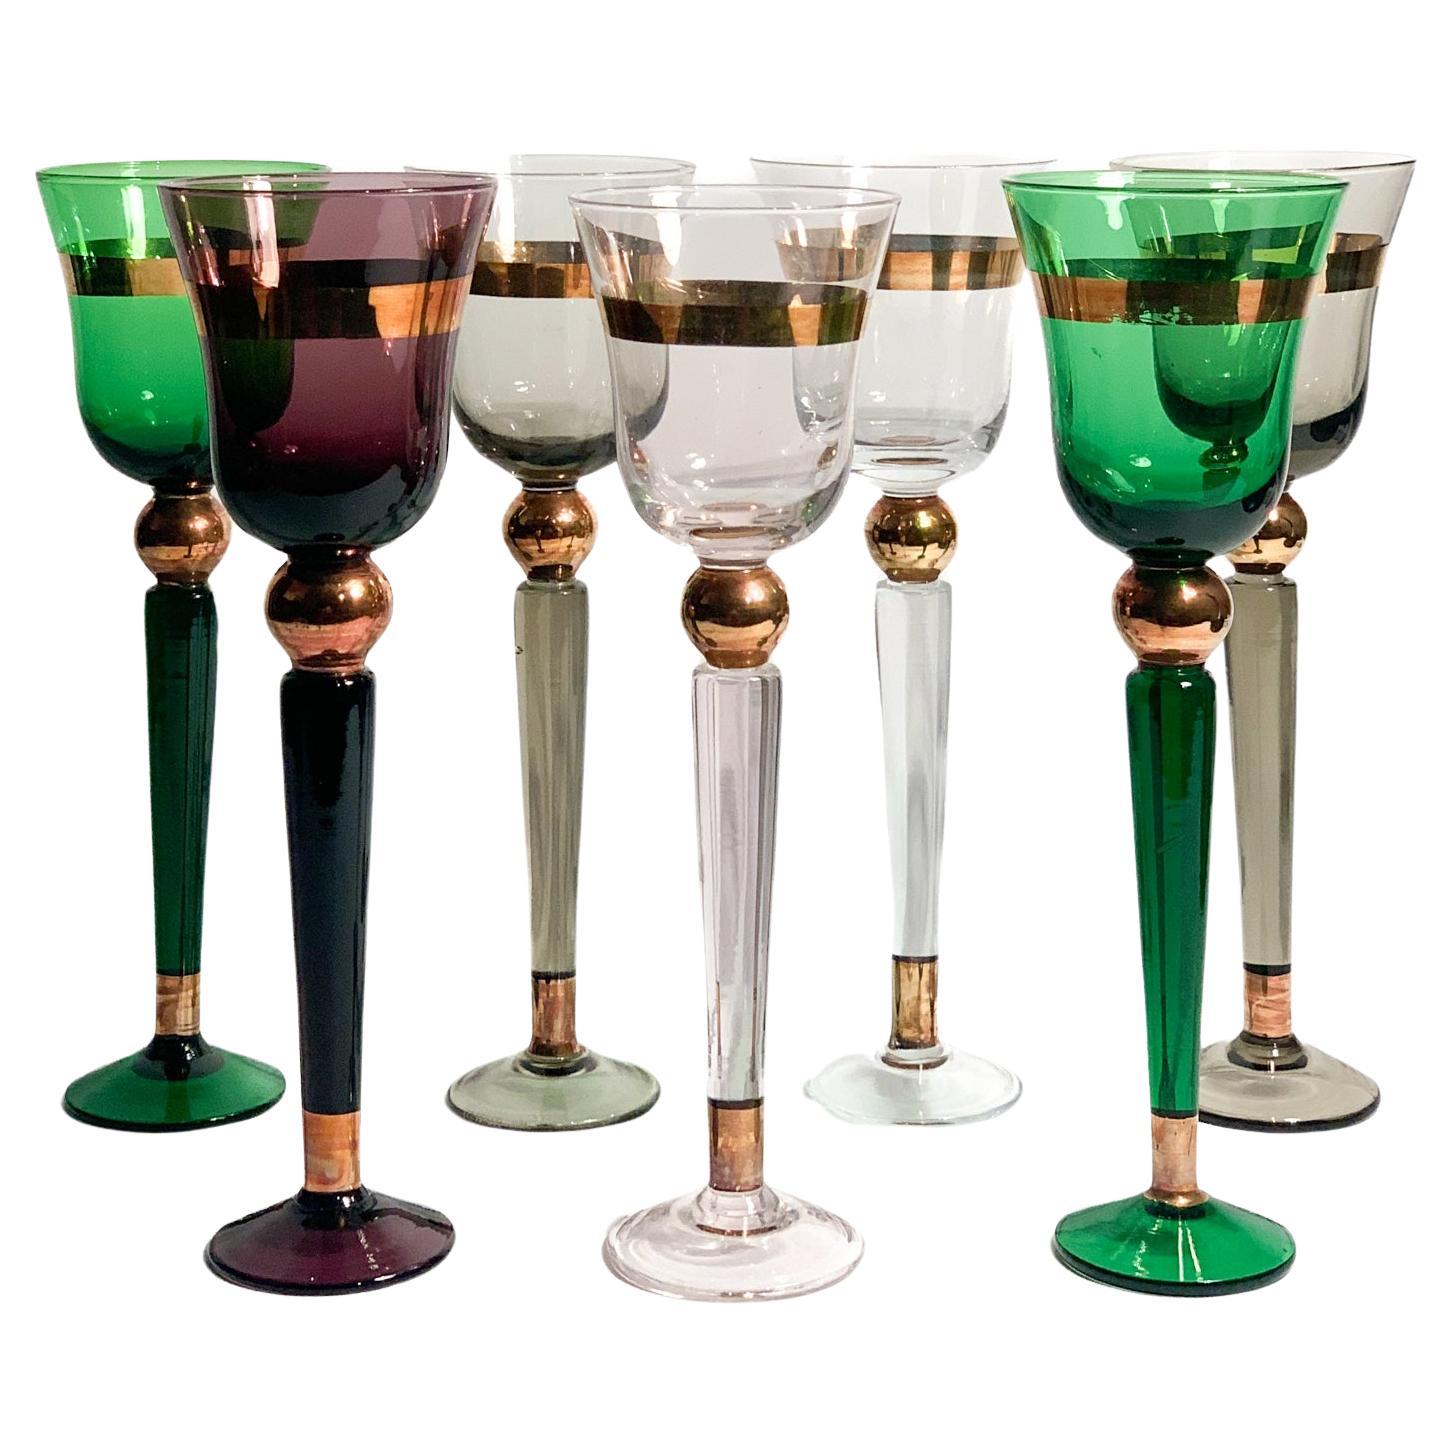 Set of 6 Venini Multicolored Murano Glass Goblets from the 1950s For Sale